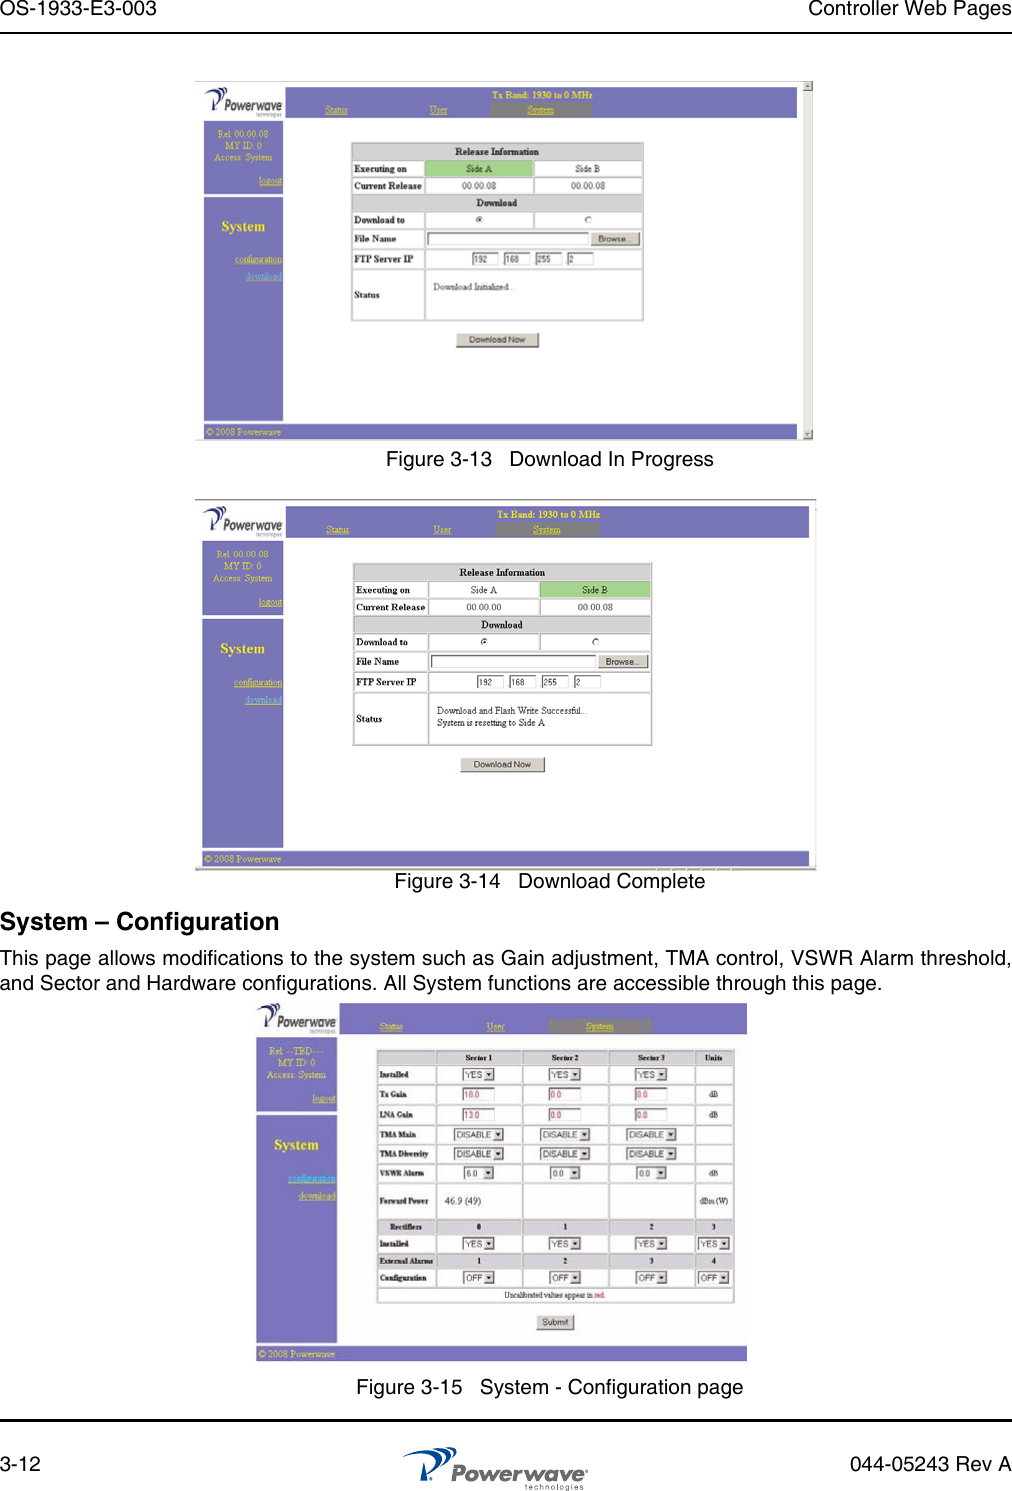 OS-1933-E3-003 Controller Web Pages3-12 044-05243 Rev AFigure 3-13   Download In ProgressFigure 3-14   Download CompleteSystem – ConfigurationThis page allows modifications to the system such as Gain adjustment, TMA control, VSWR Alarm threshold,and Sector and Hardware configurations. All System functions are accessible through this page.Figure 3-15   System - Configuration page